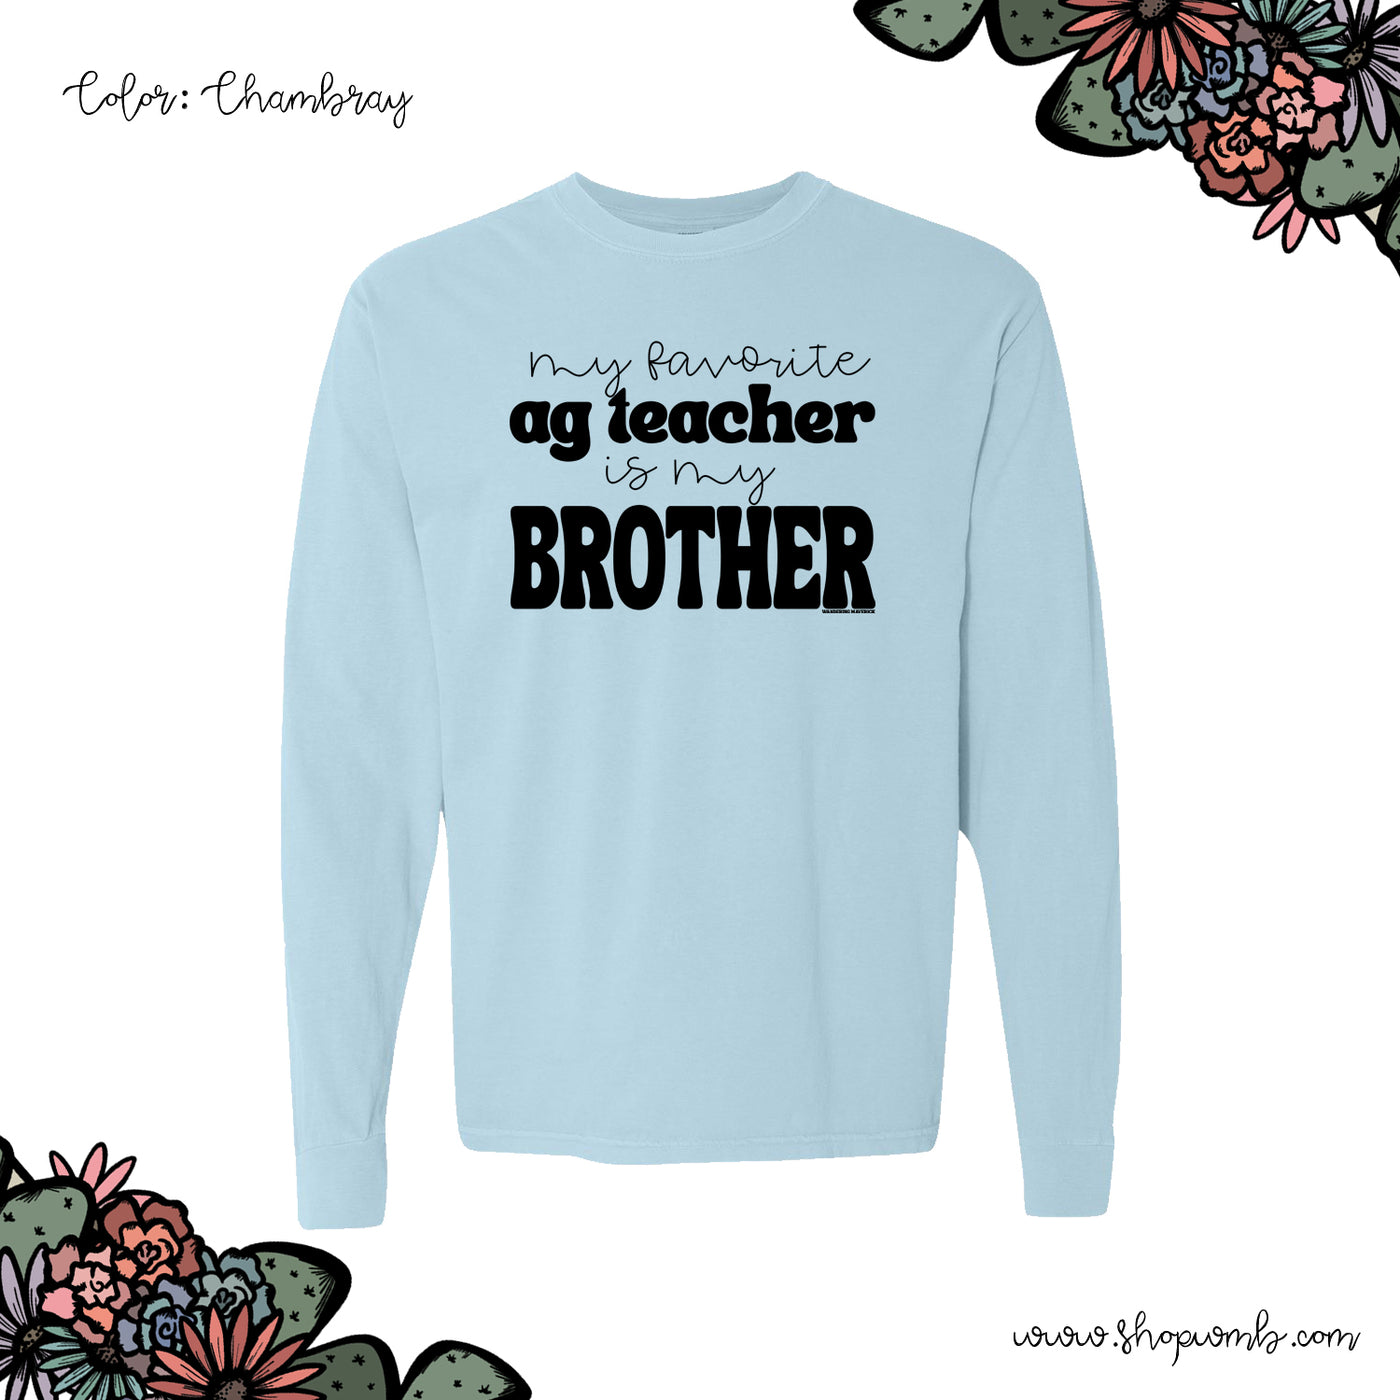 My Favorite Ag Teacher Is My Brother LONG SLEEVE T-Shirt (S-3XL) - Multiple Colors!